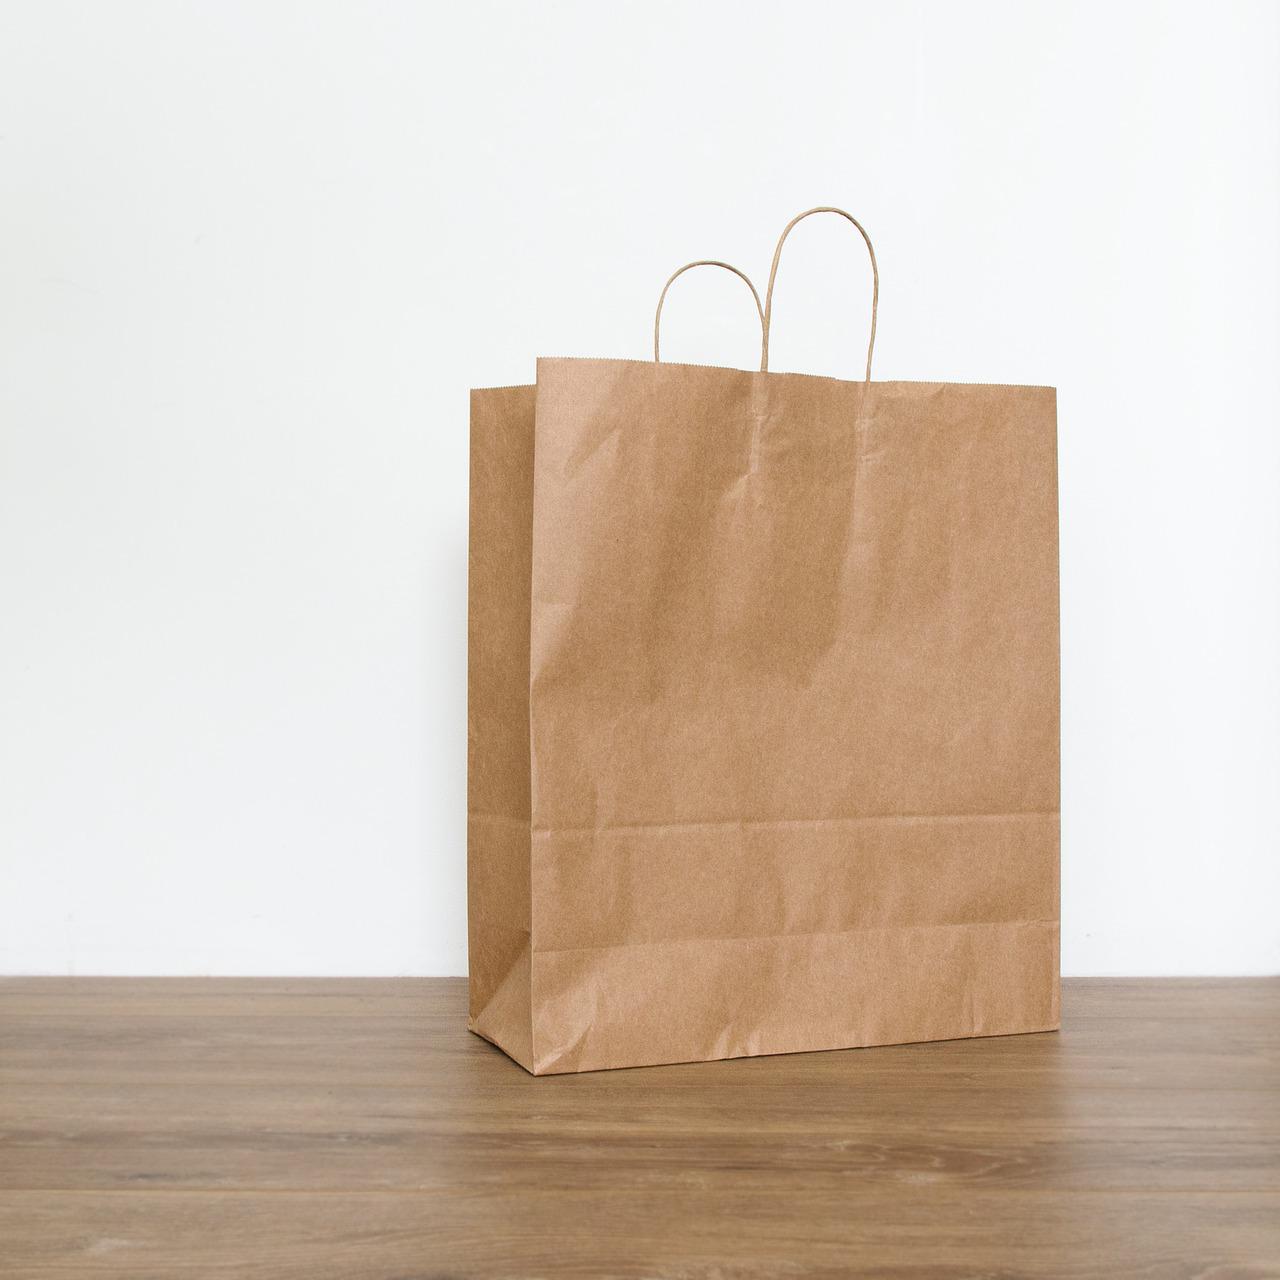 Paper Bag - Bagged Packaged goods